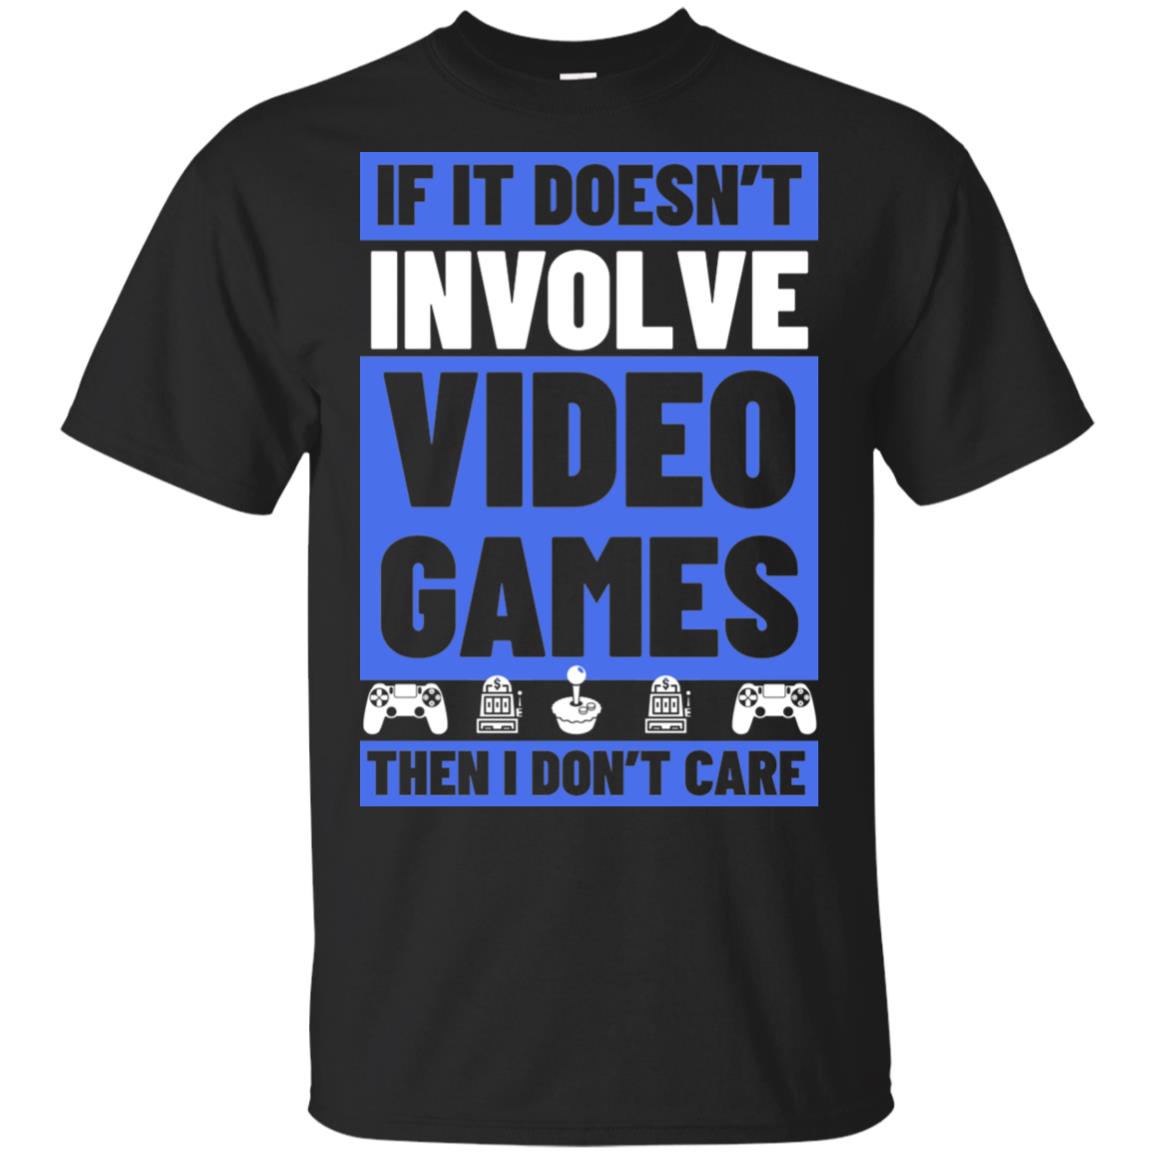 If It Doesn't Involve Video Games Then I Don't Care Shirt | AllBlueTees